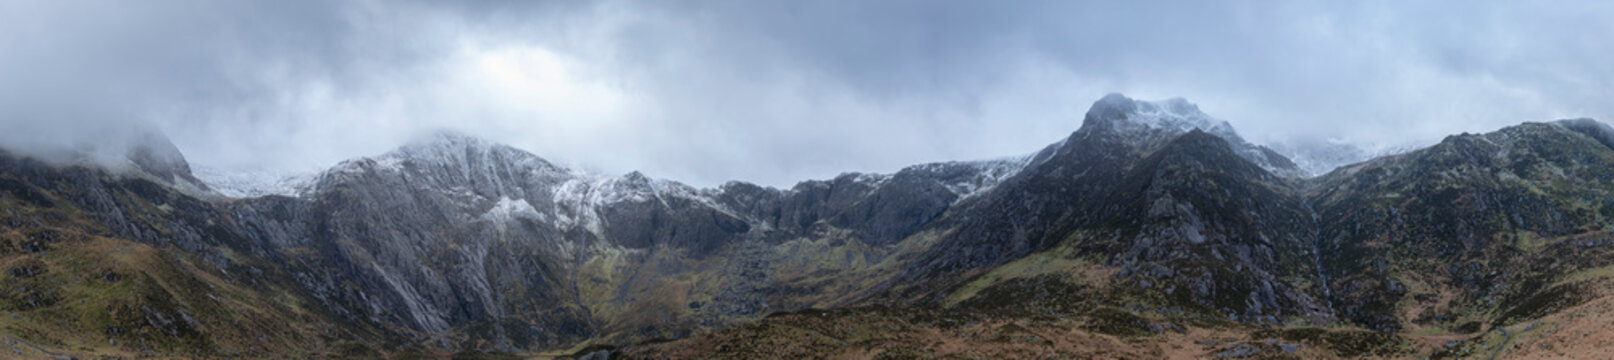 Stunning dramatic panoramic landscape image of snowcapped Glyders mountain range in Snowdonia during Winter with menacing low cloudshanging at the mountain peaks